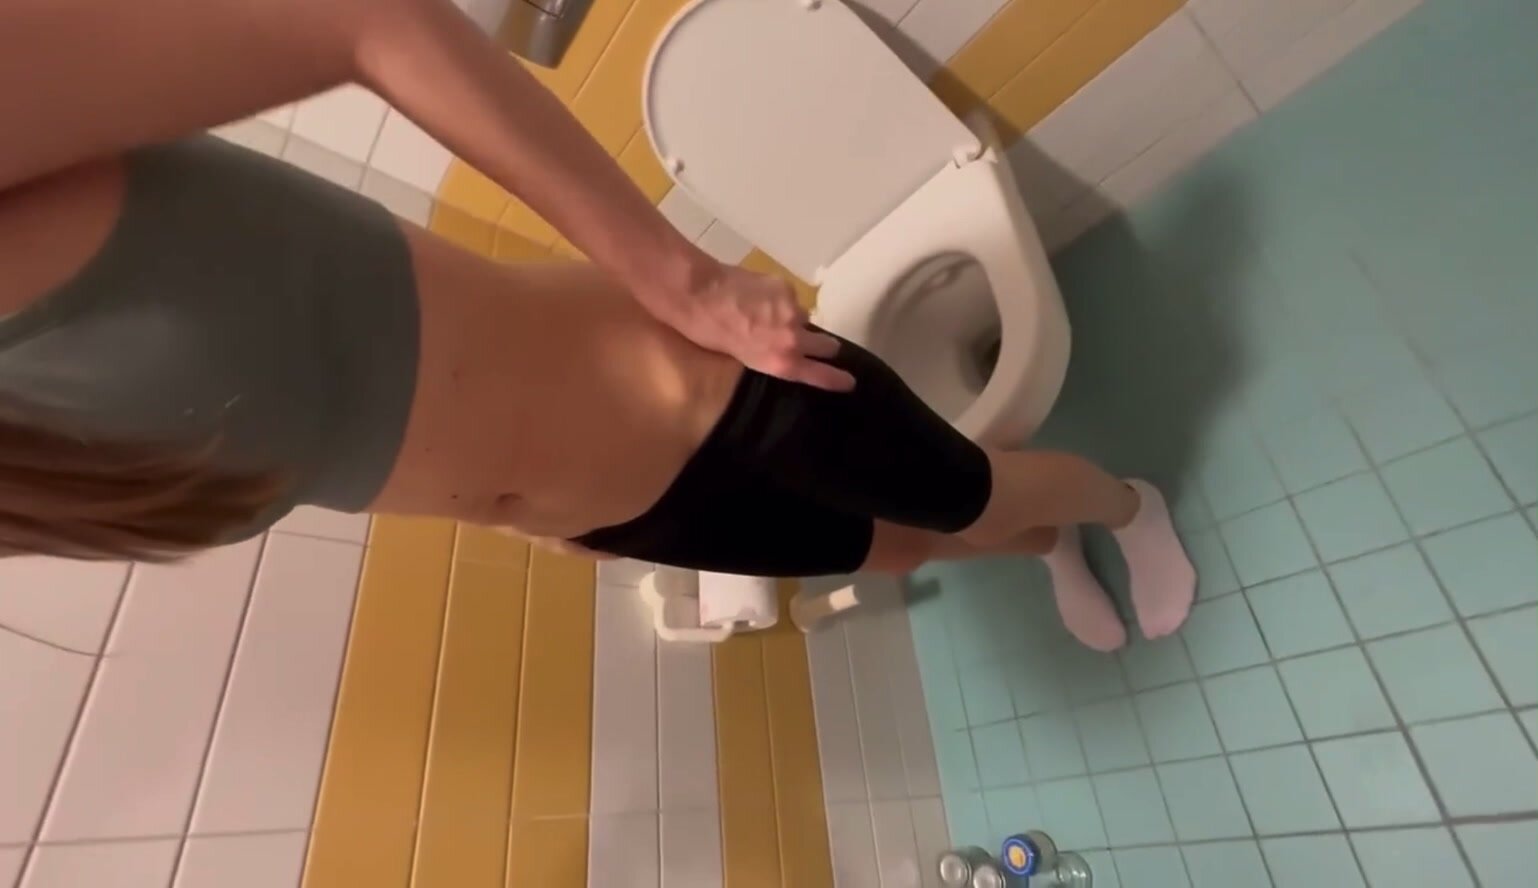 Girl squats over toilet